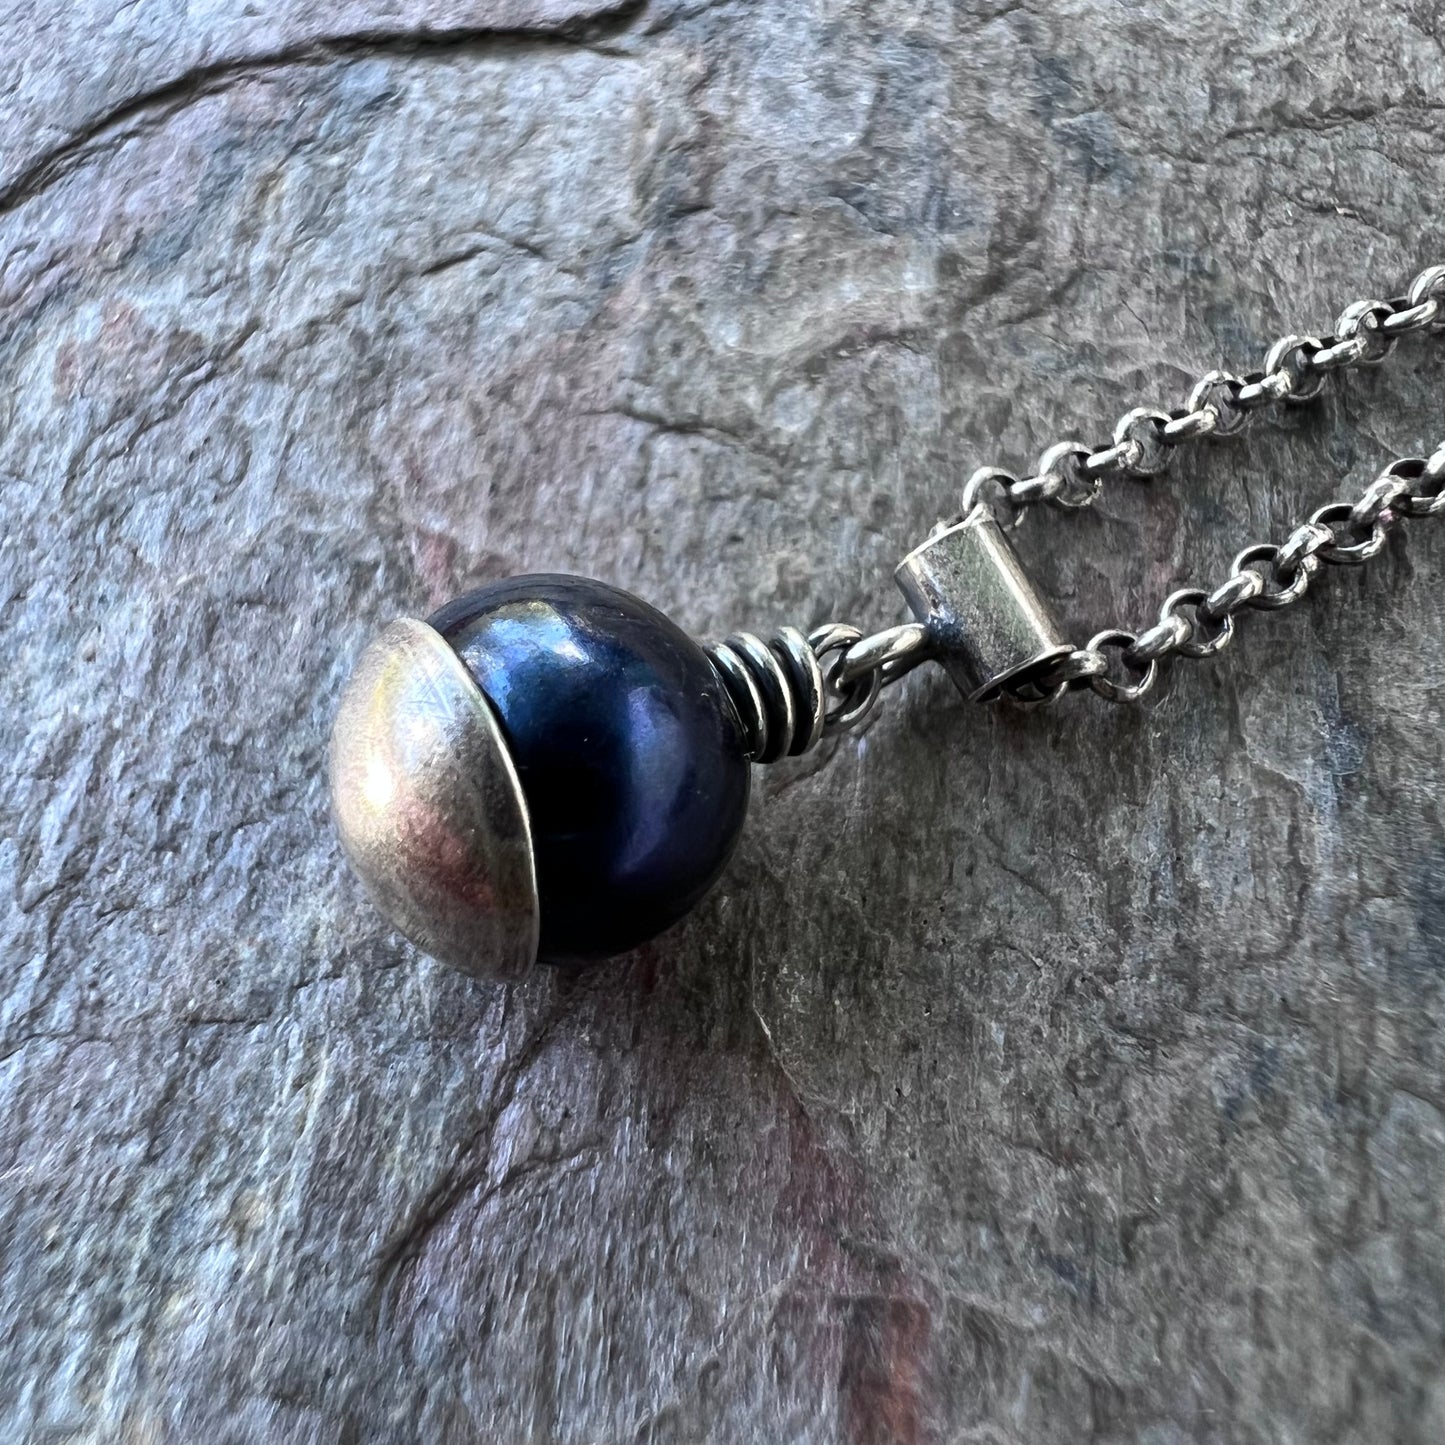 Black Pearl and Sterling Silver Necklace - Genuine Pearl Pendant on Sterling Silver Chain